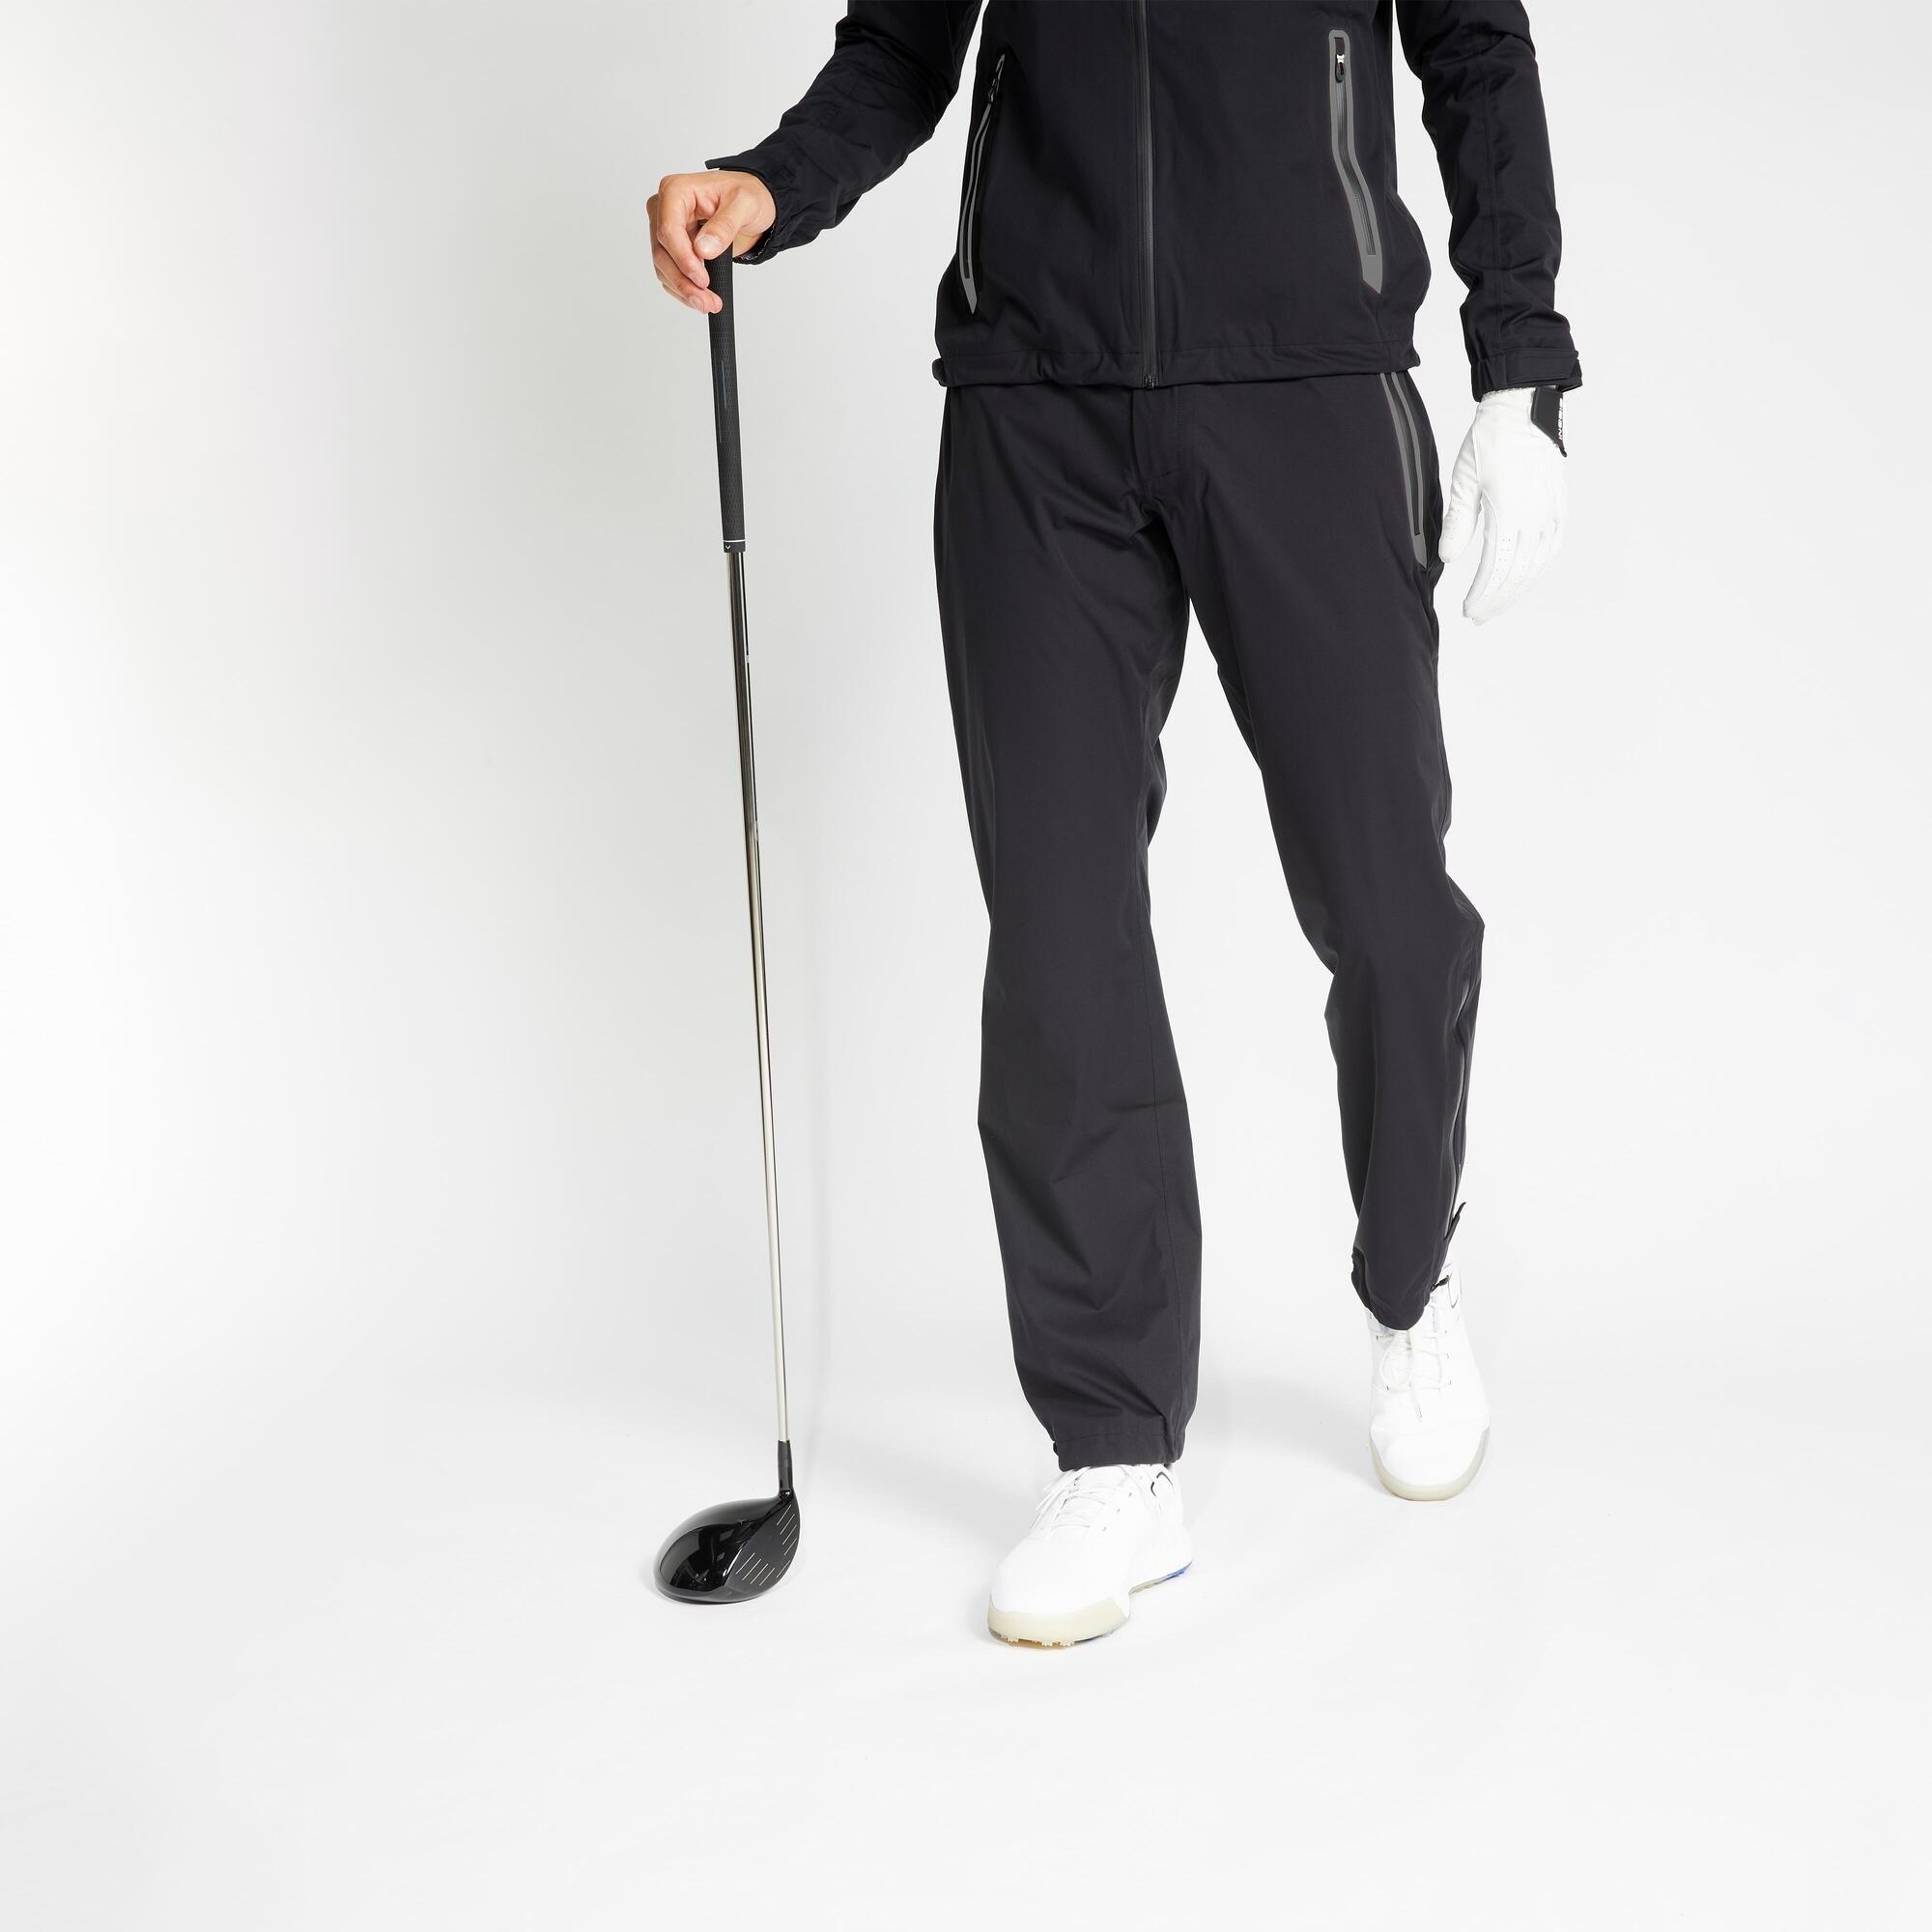 Best Golf Trousers 2022